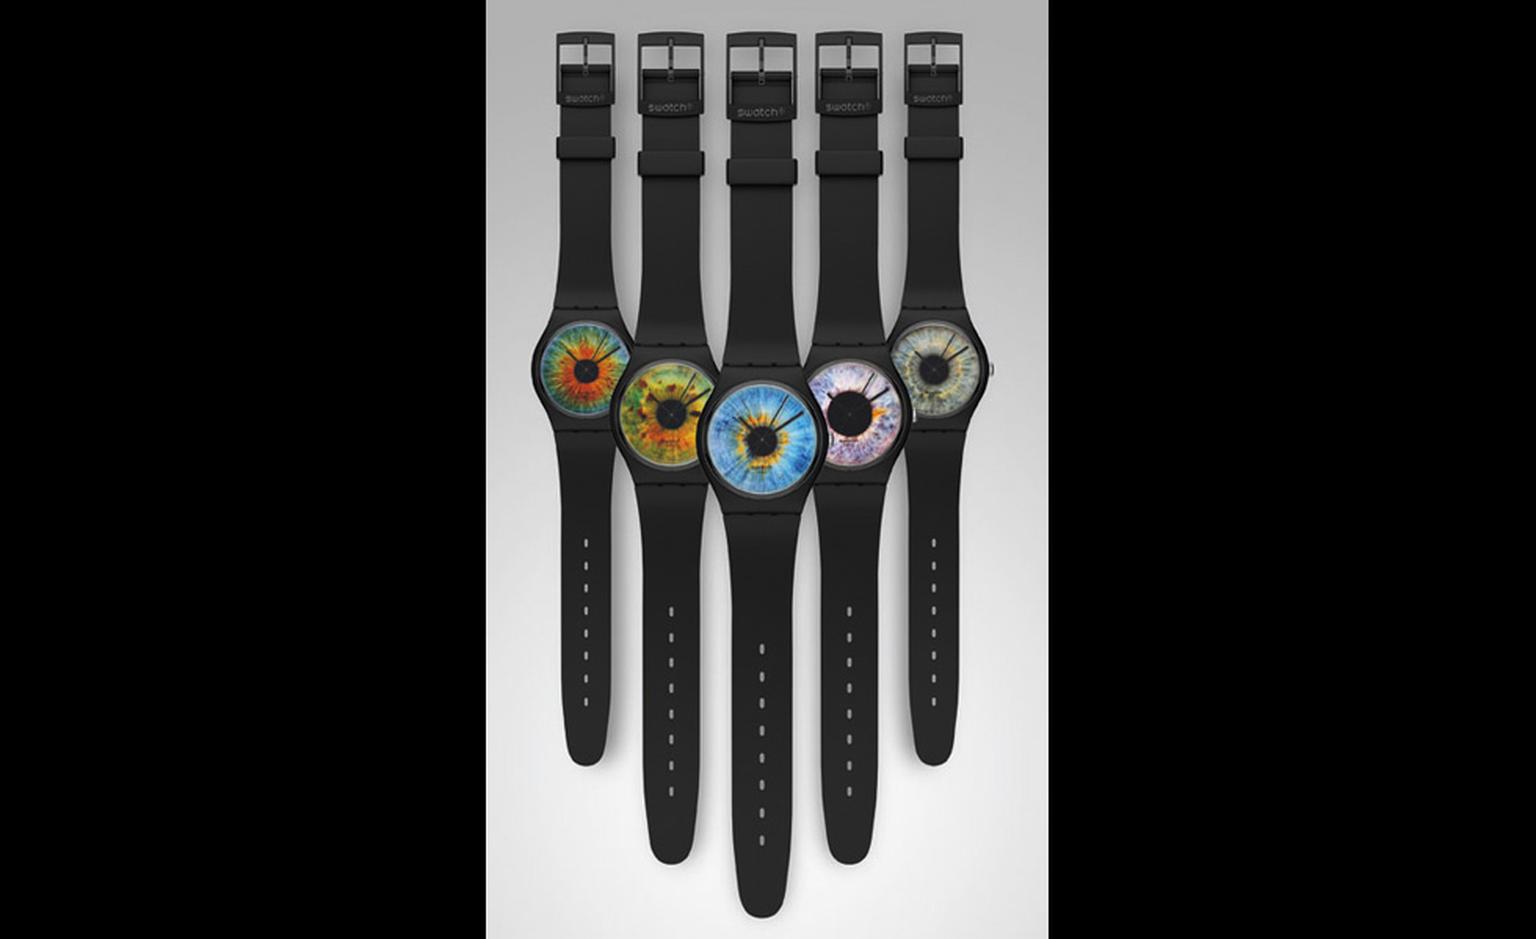 The five Rankin Swatch watches that make up the Limited Edition set of five for £190.50 sold in a box set - collectors have started to snap these up.